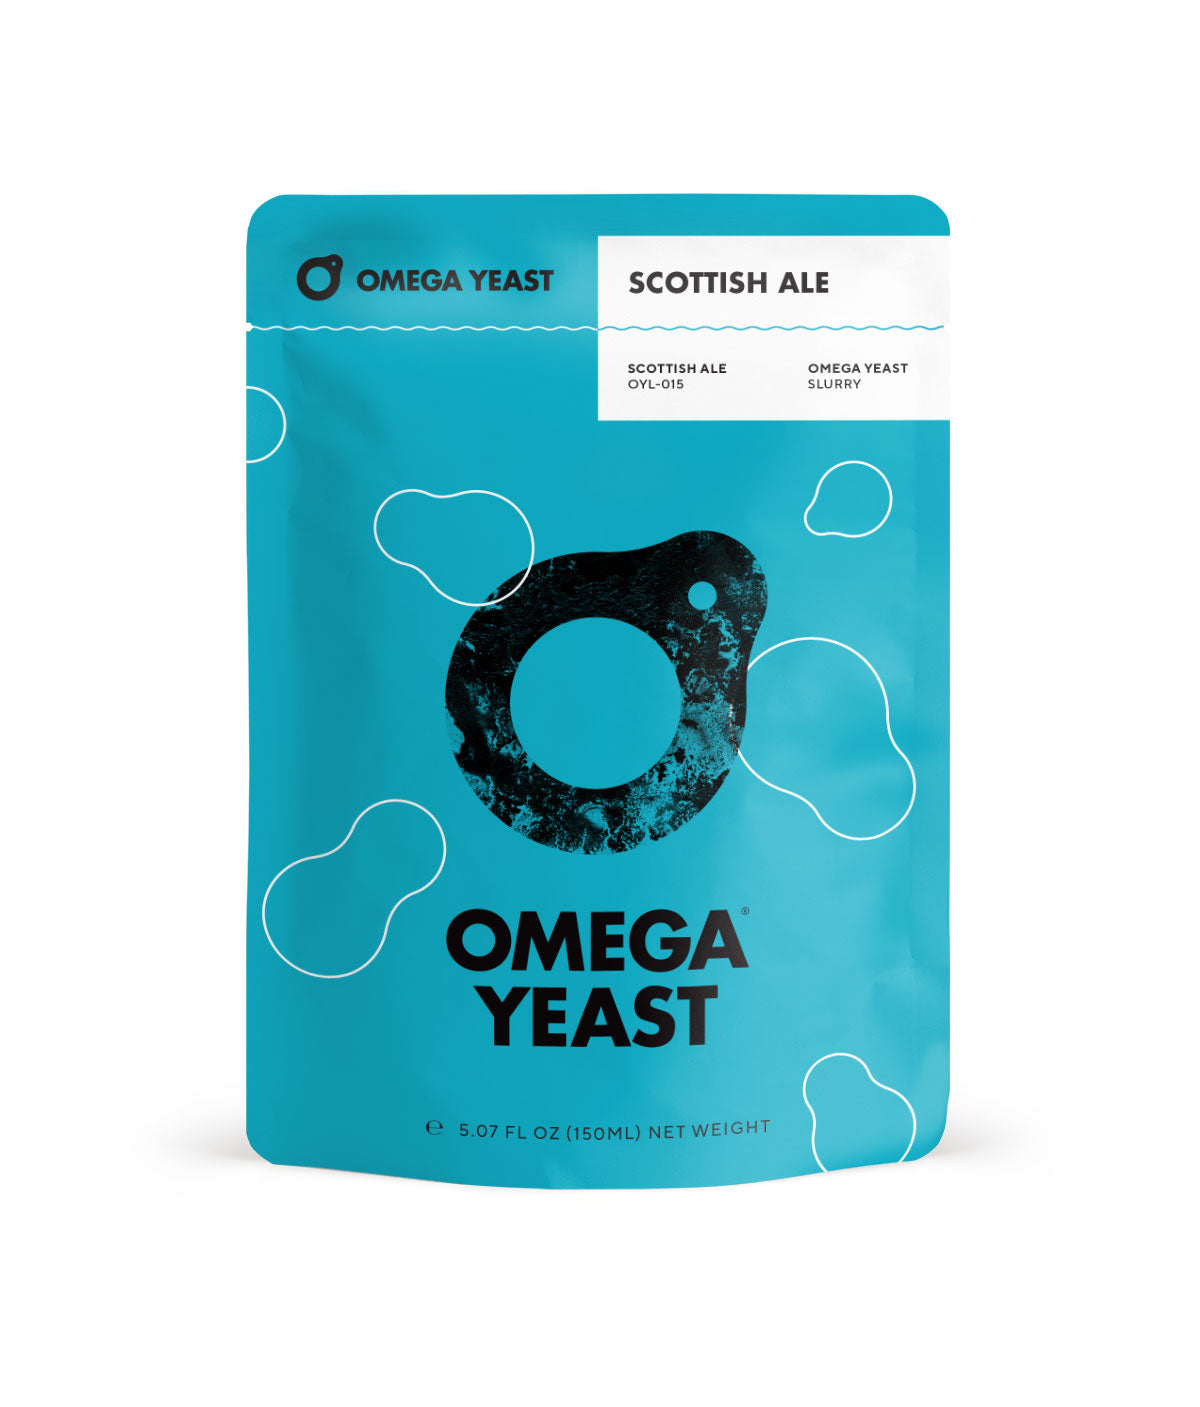 Scottish Ale Yeast by Omega Yeast